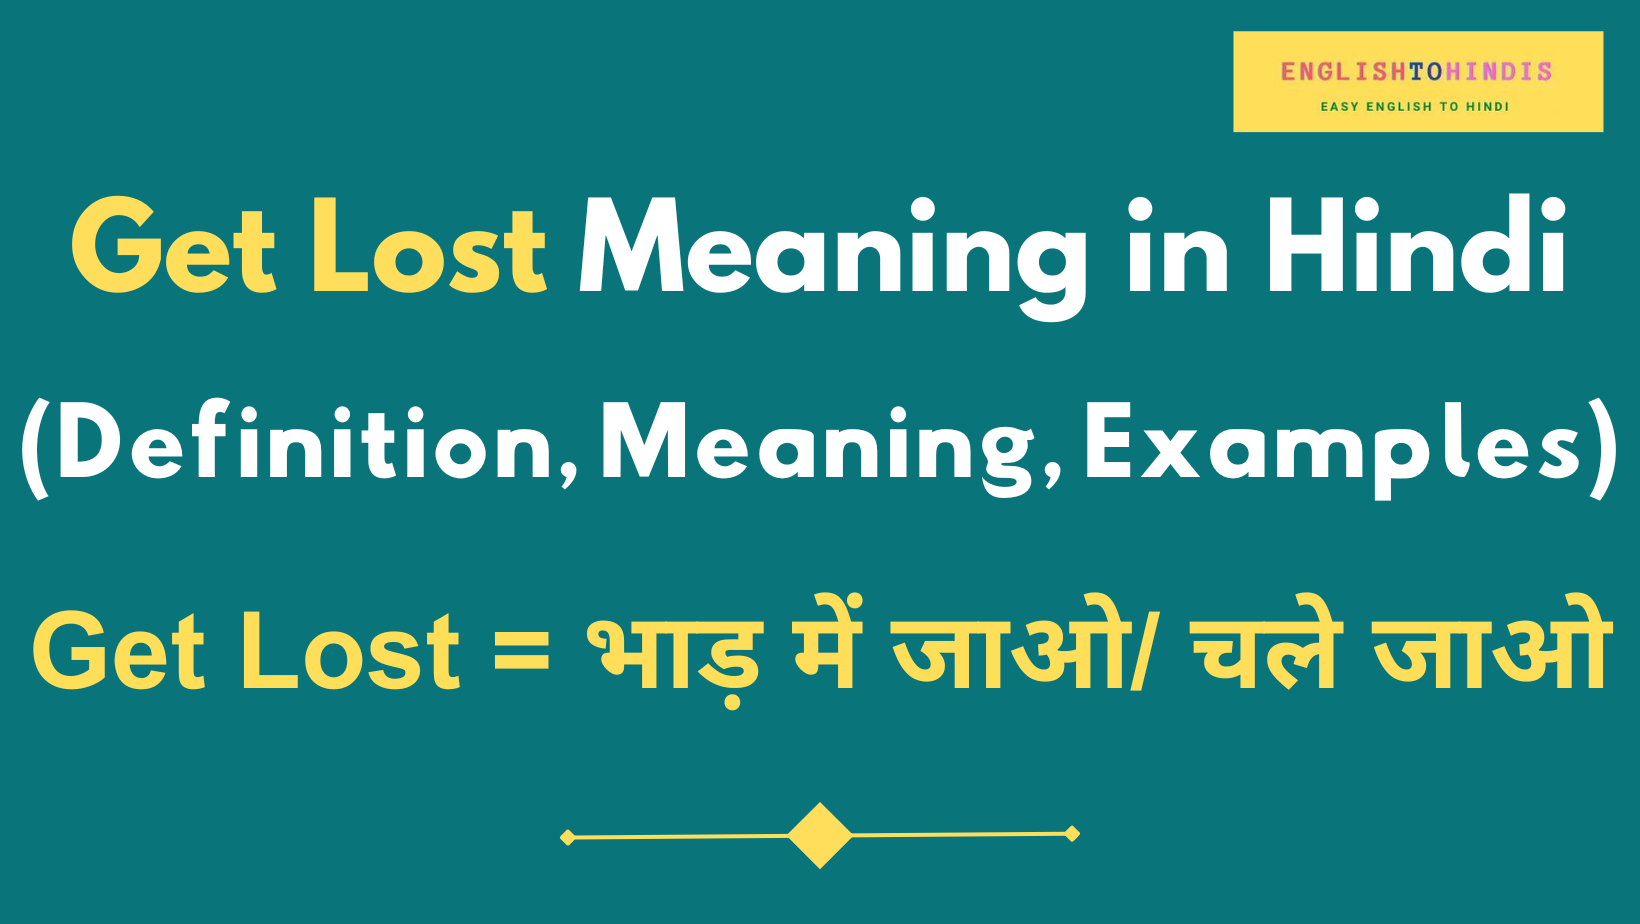 Get Lost Meaning in Hindi